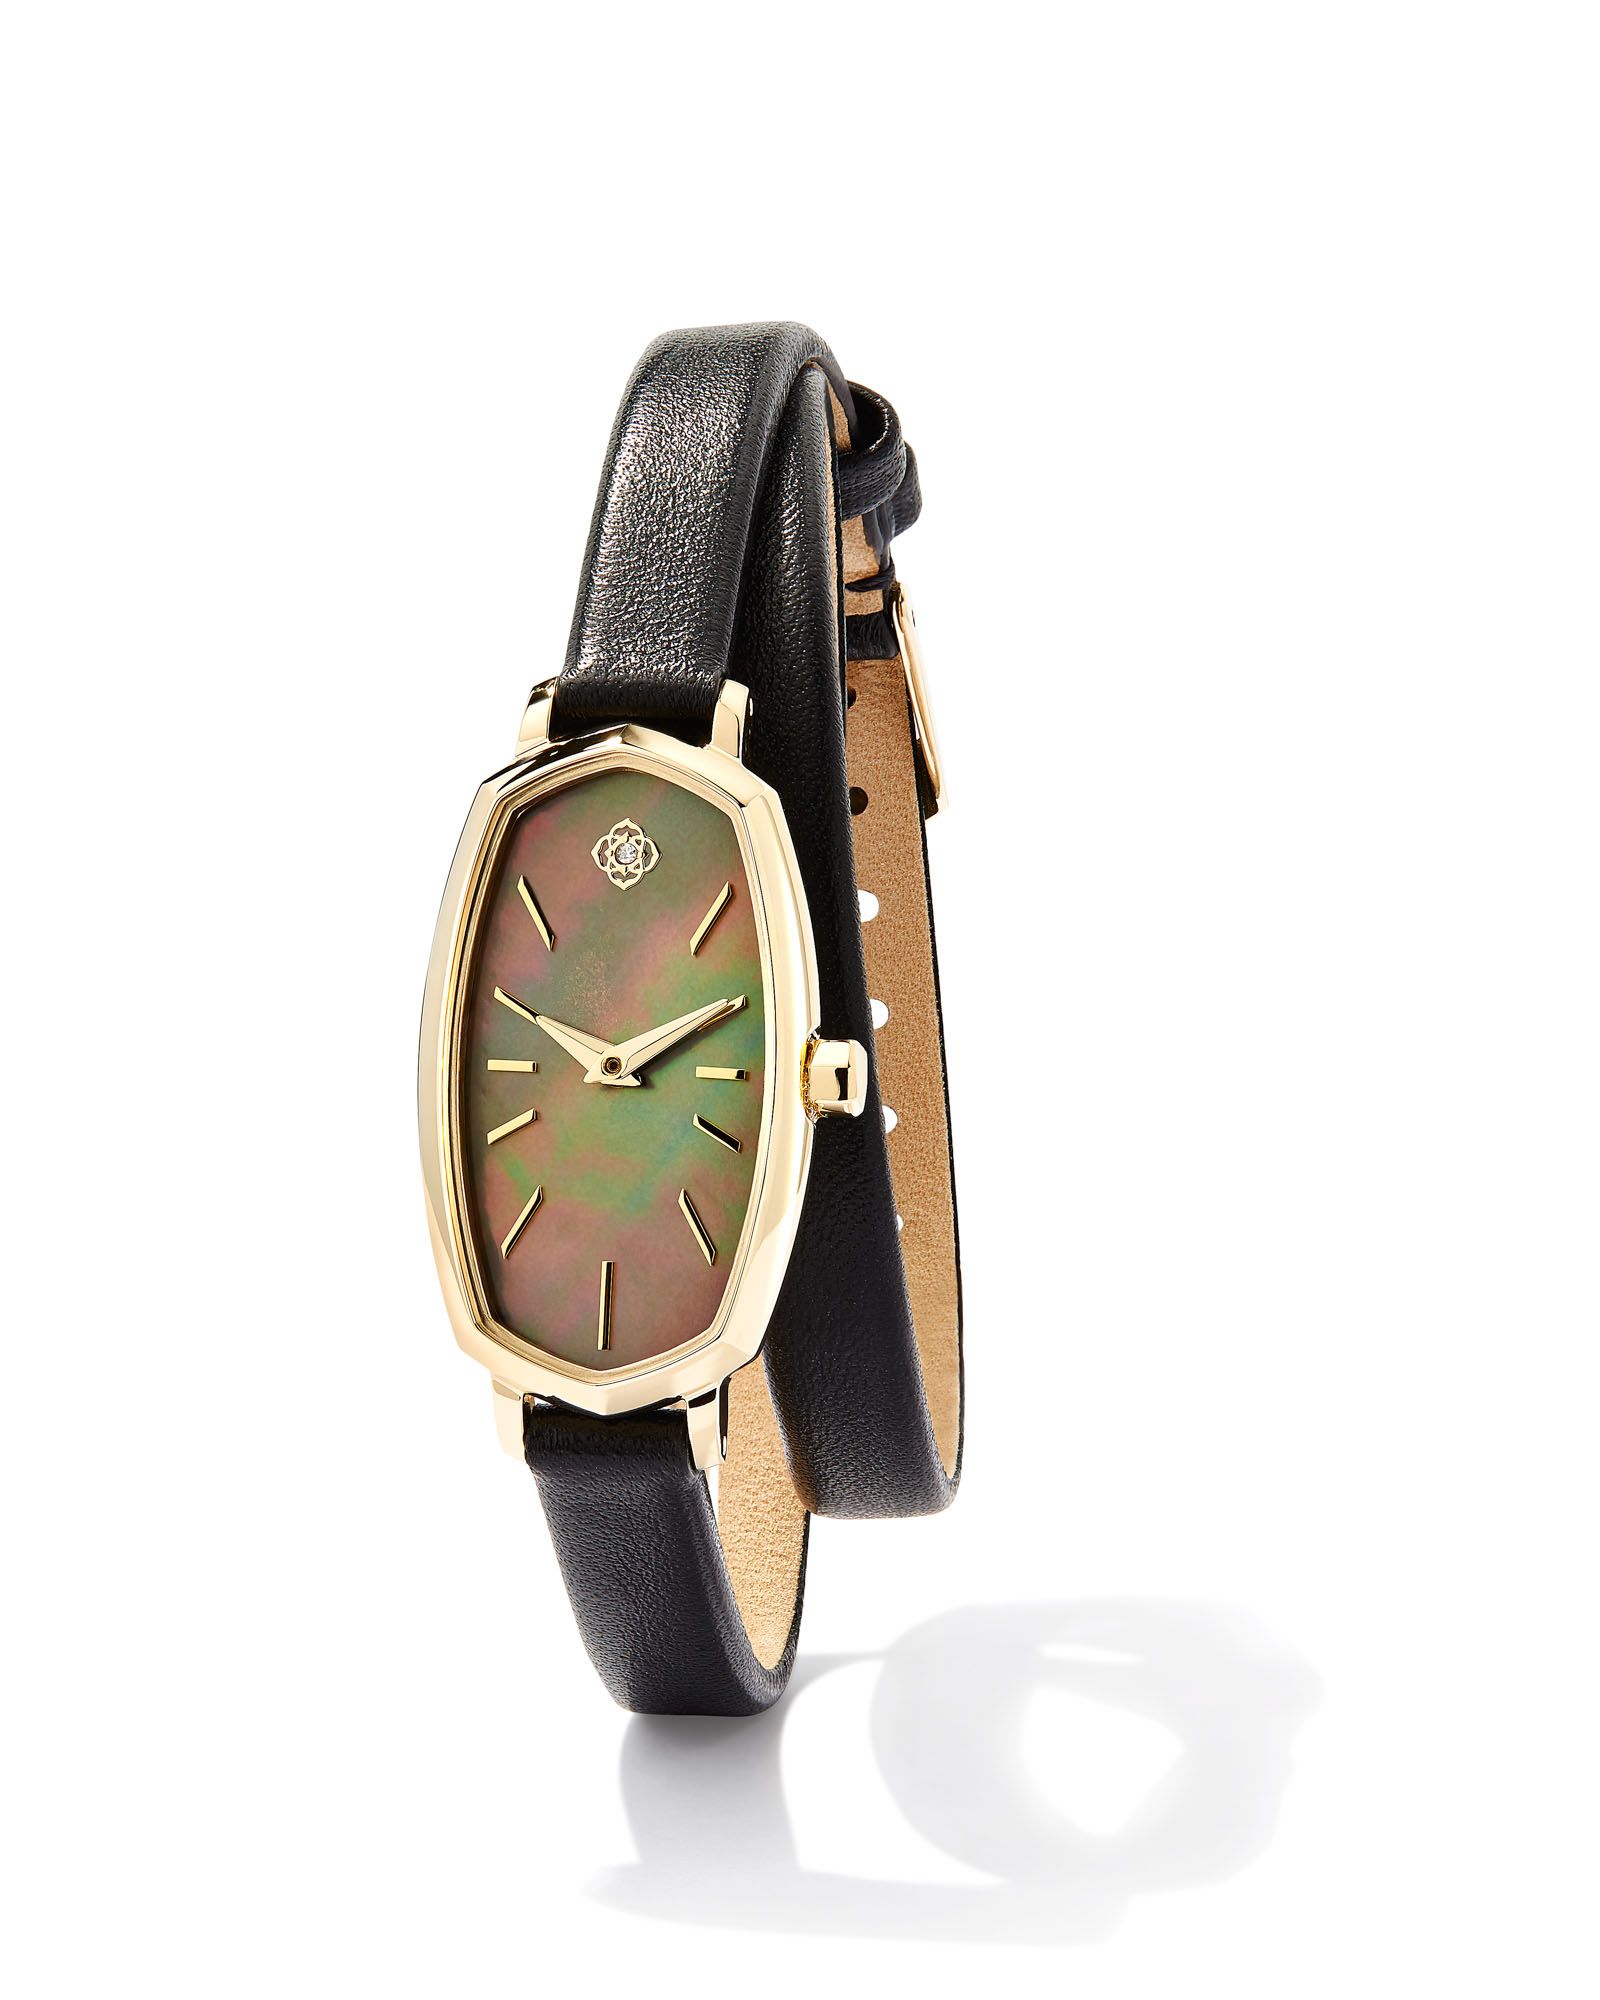 Elle Gold Tone Stainless Steel Leather Wrap Watch in Black Mother-of-Pearl | Kendra Scott